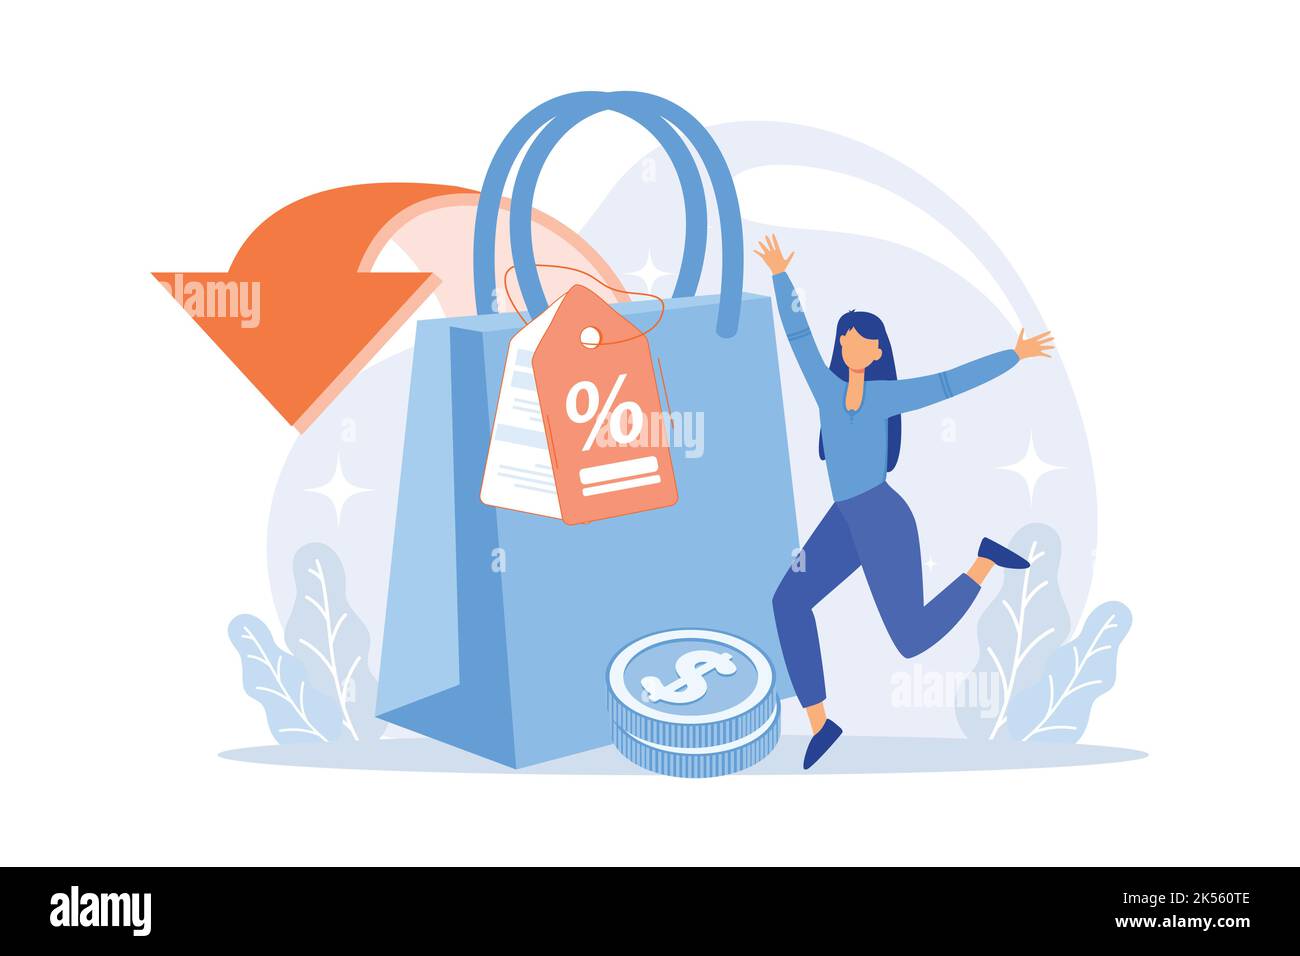 Shopping discounts and allowances cartoon web icon. Selling price reduction, retail sales, creative marketing. Special offer, customer attraction idea Stock Vector